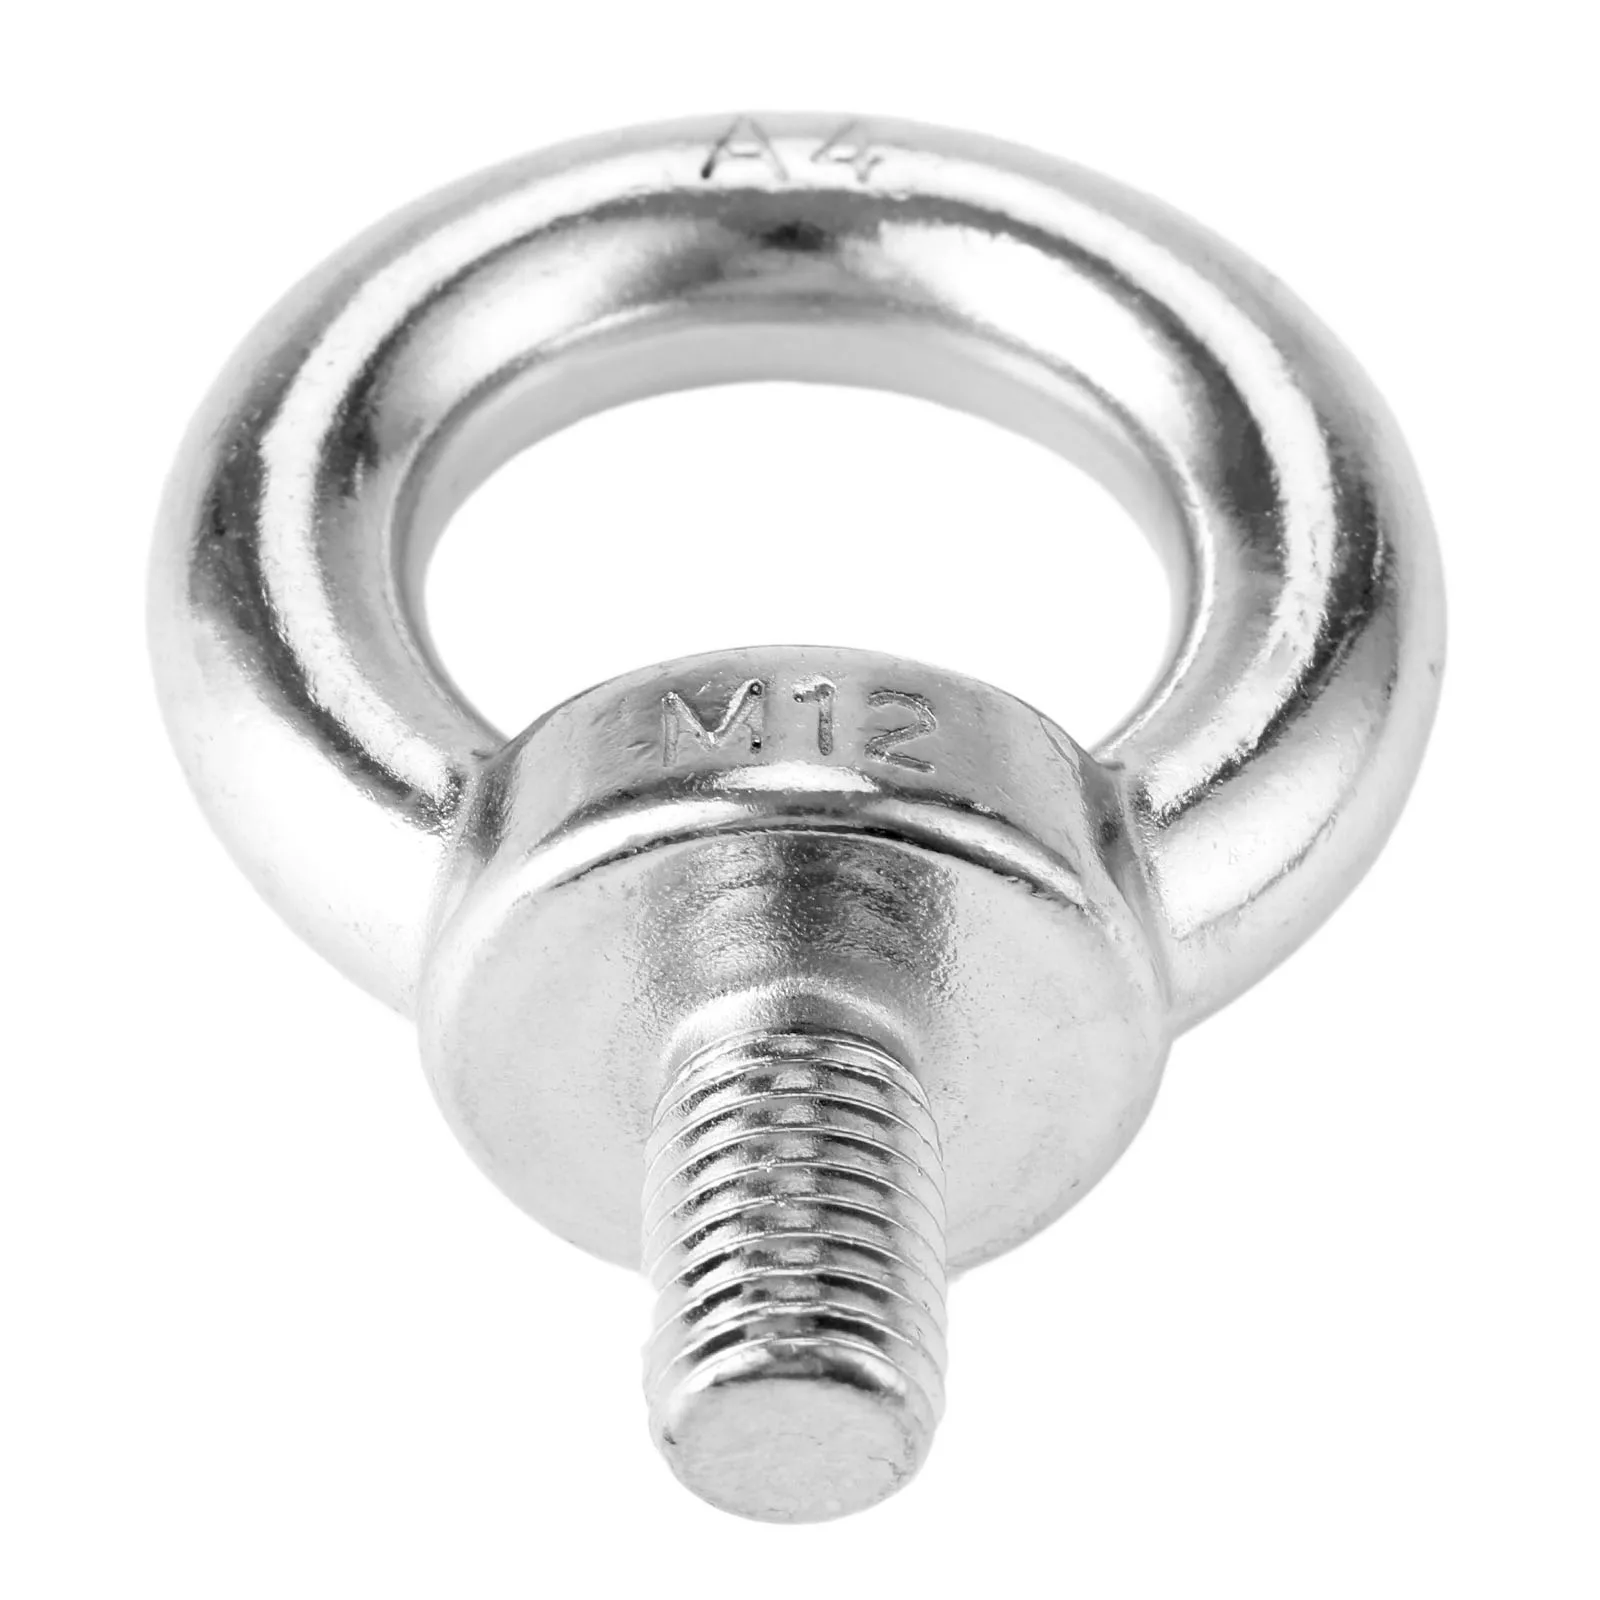 1pc M12 Marine Grade 316 Stainless Steel Eyebolt Lifting Eye Bolts Ring Screw Loop Hole Bolt For Cable Rope Lifting Boat Fitting